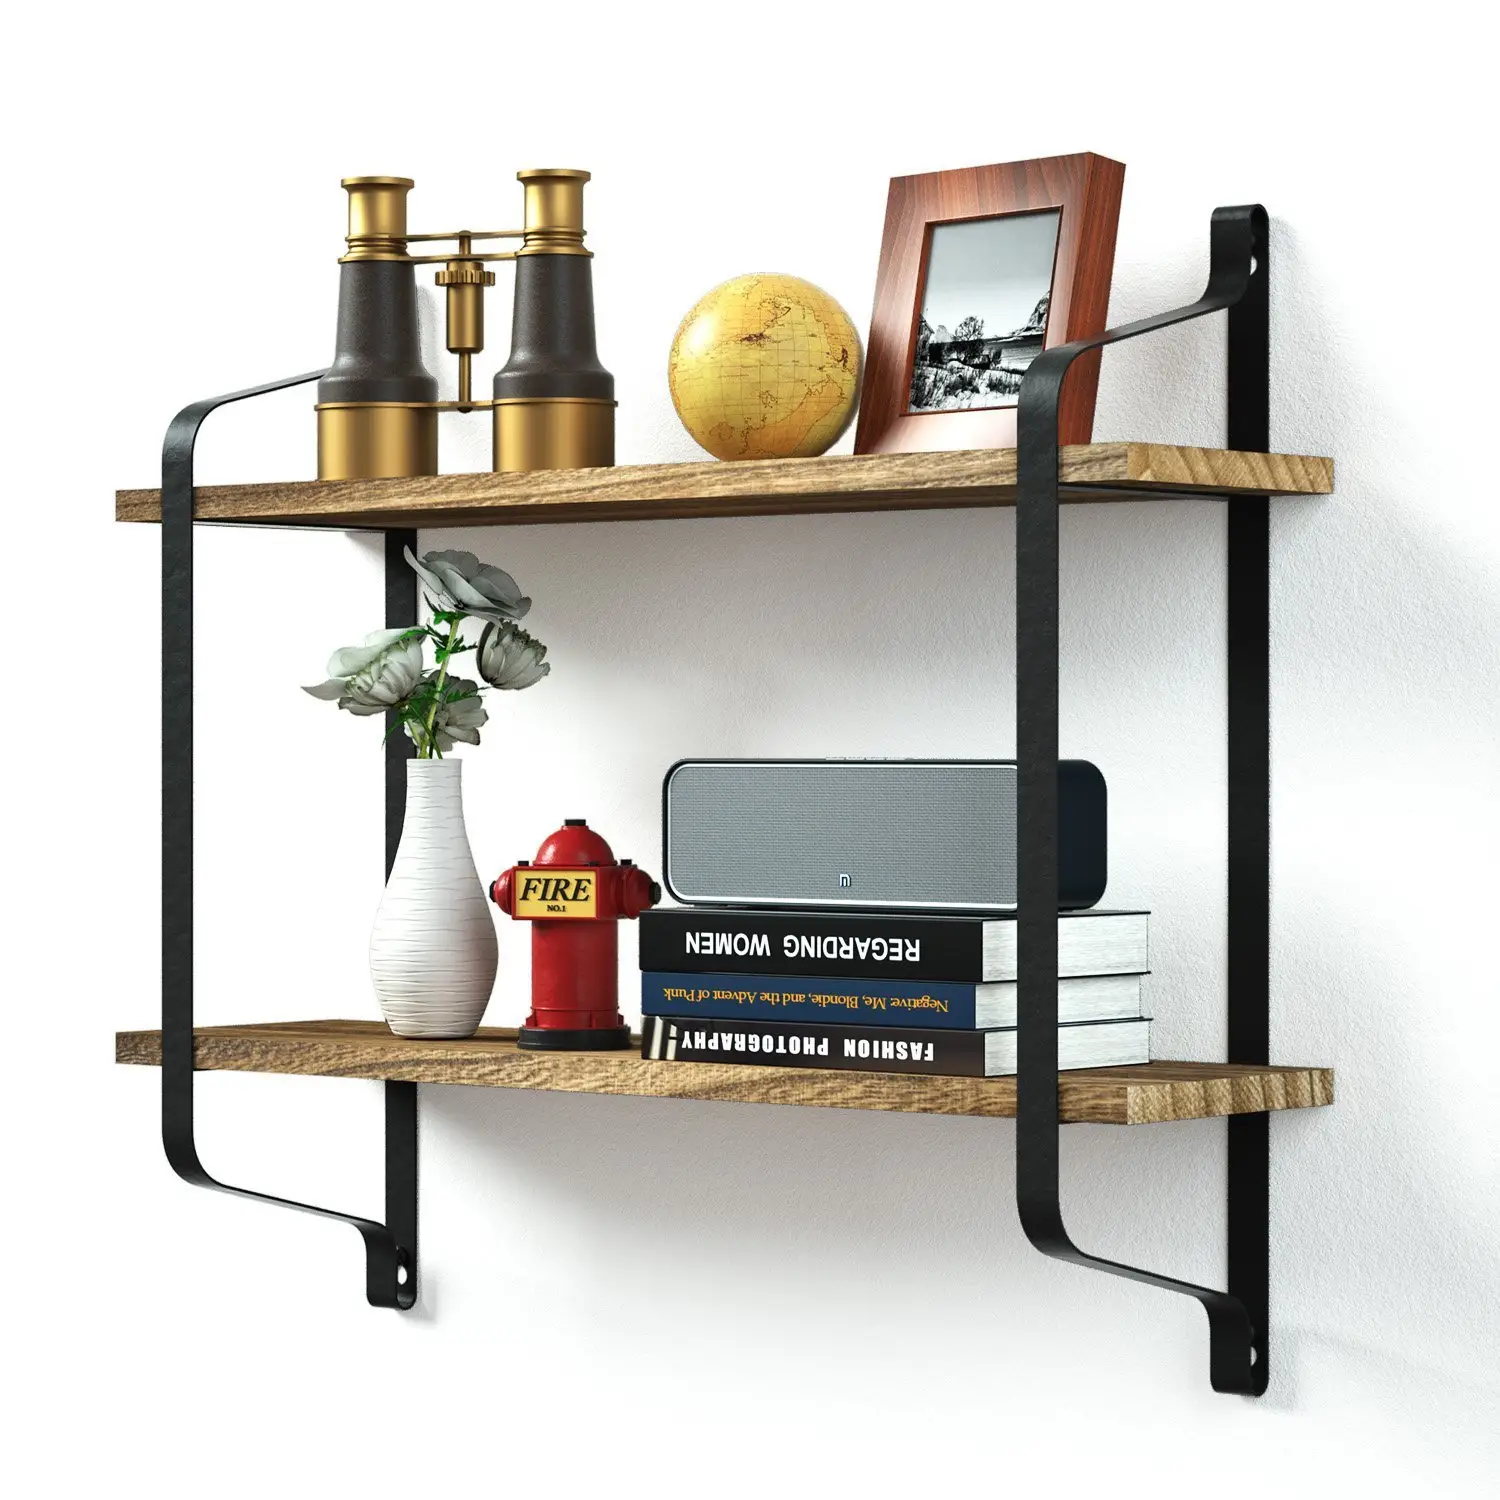 QL14 New Wrought Iron Shelf Kitchen And Bathroom Solid Wood Wall Shelf Wrought Iron Two-layer Storage Rack